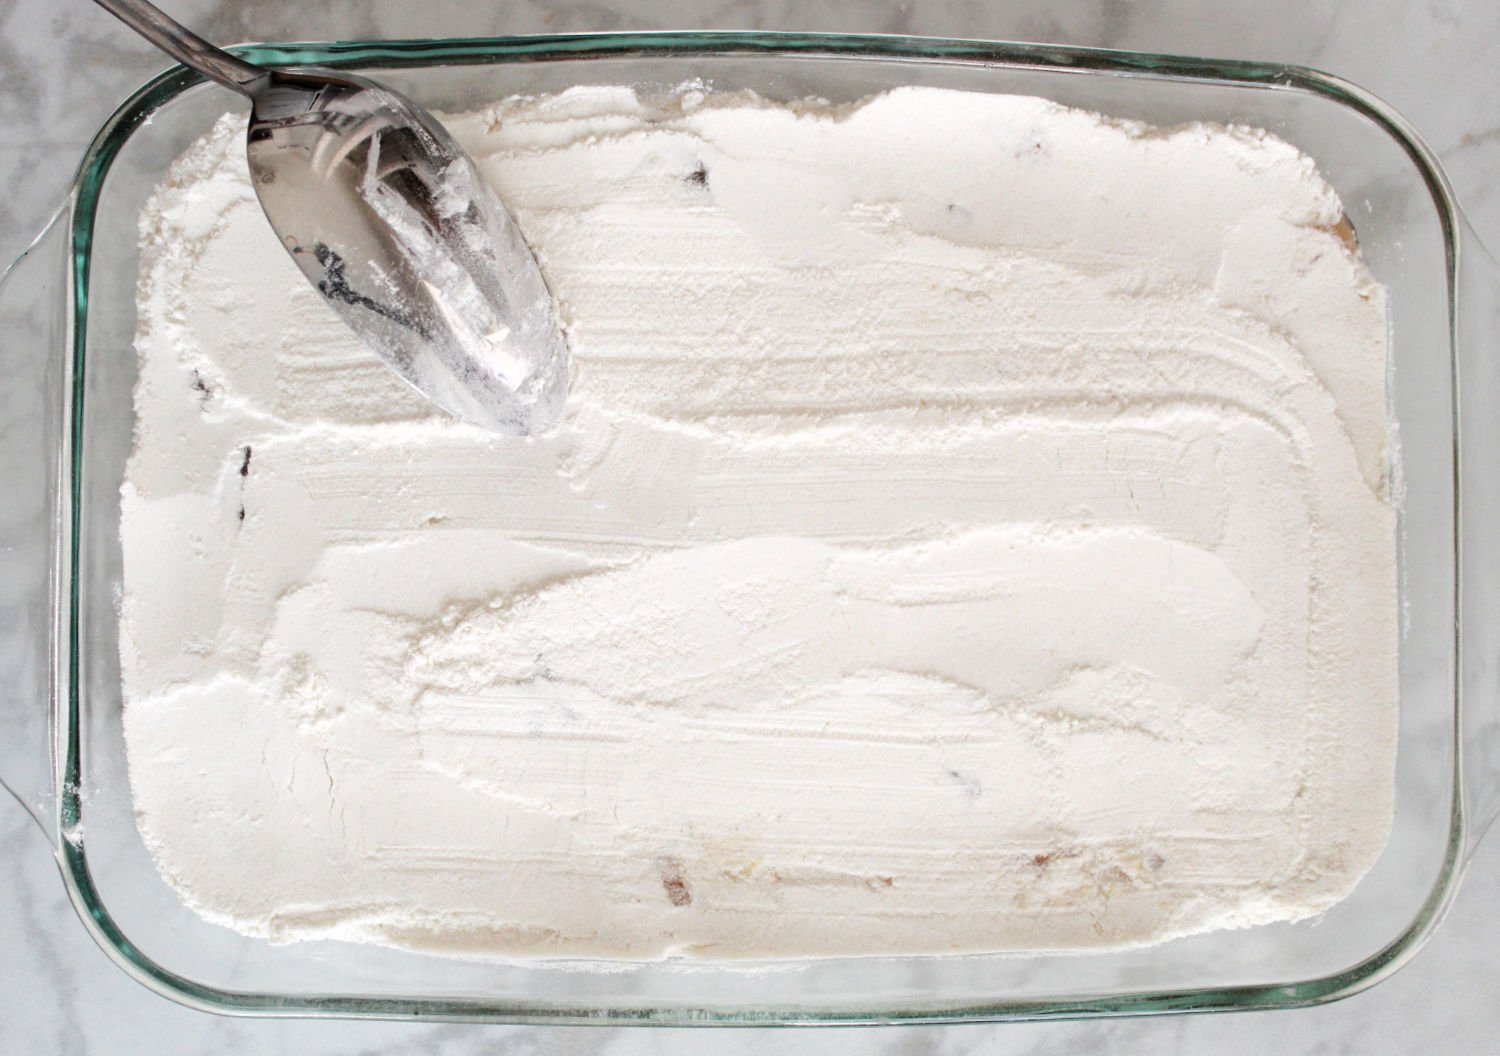 A smoothed layer of dry cake mix.